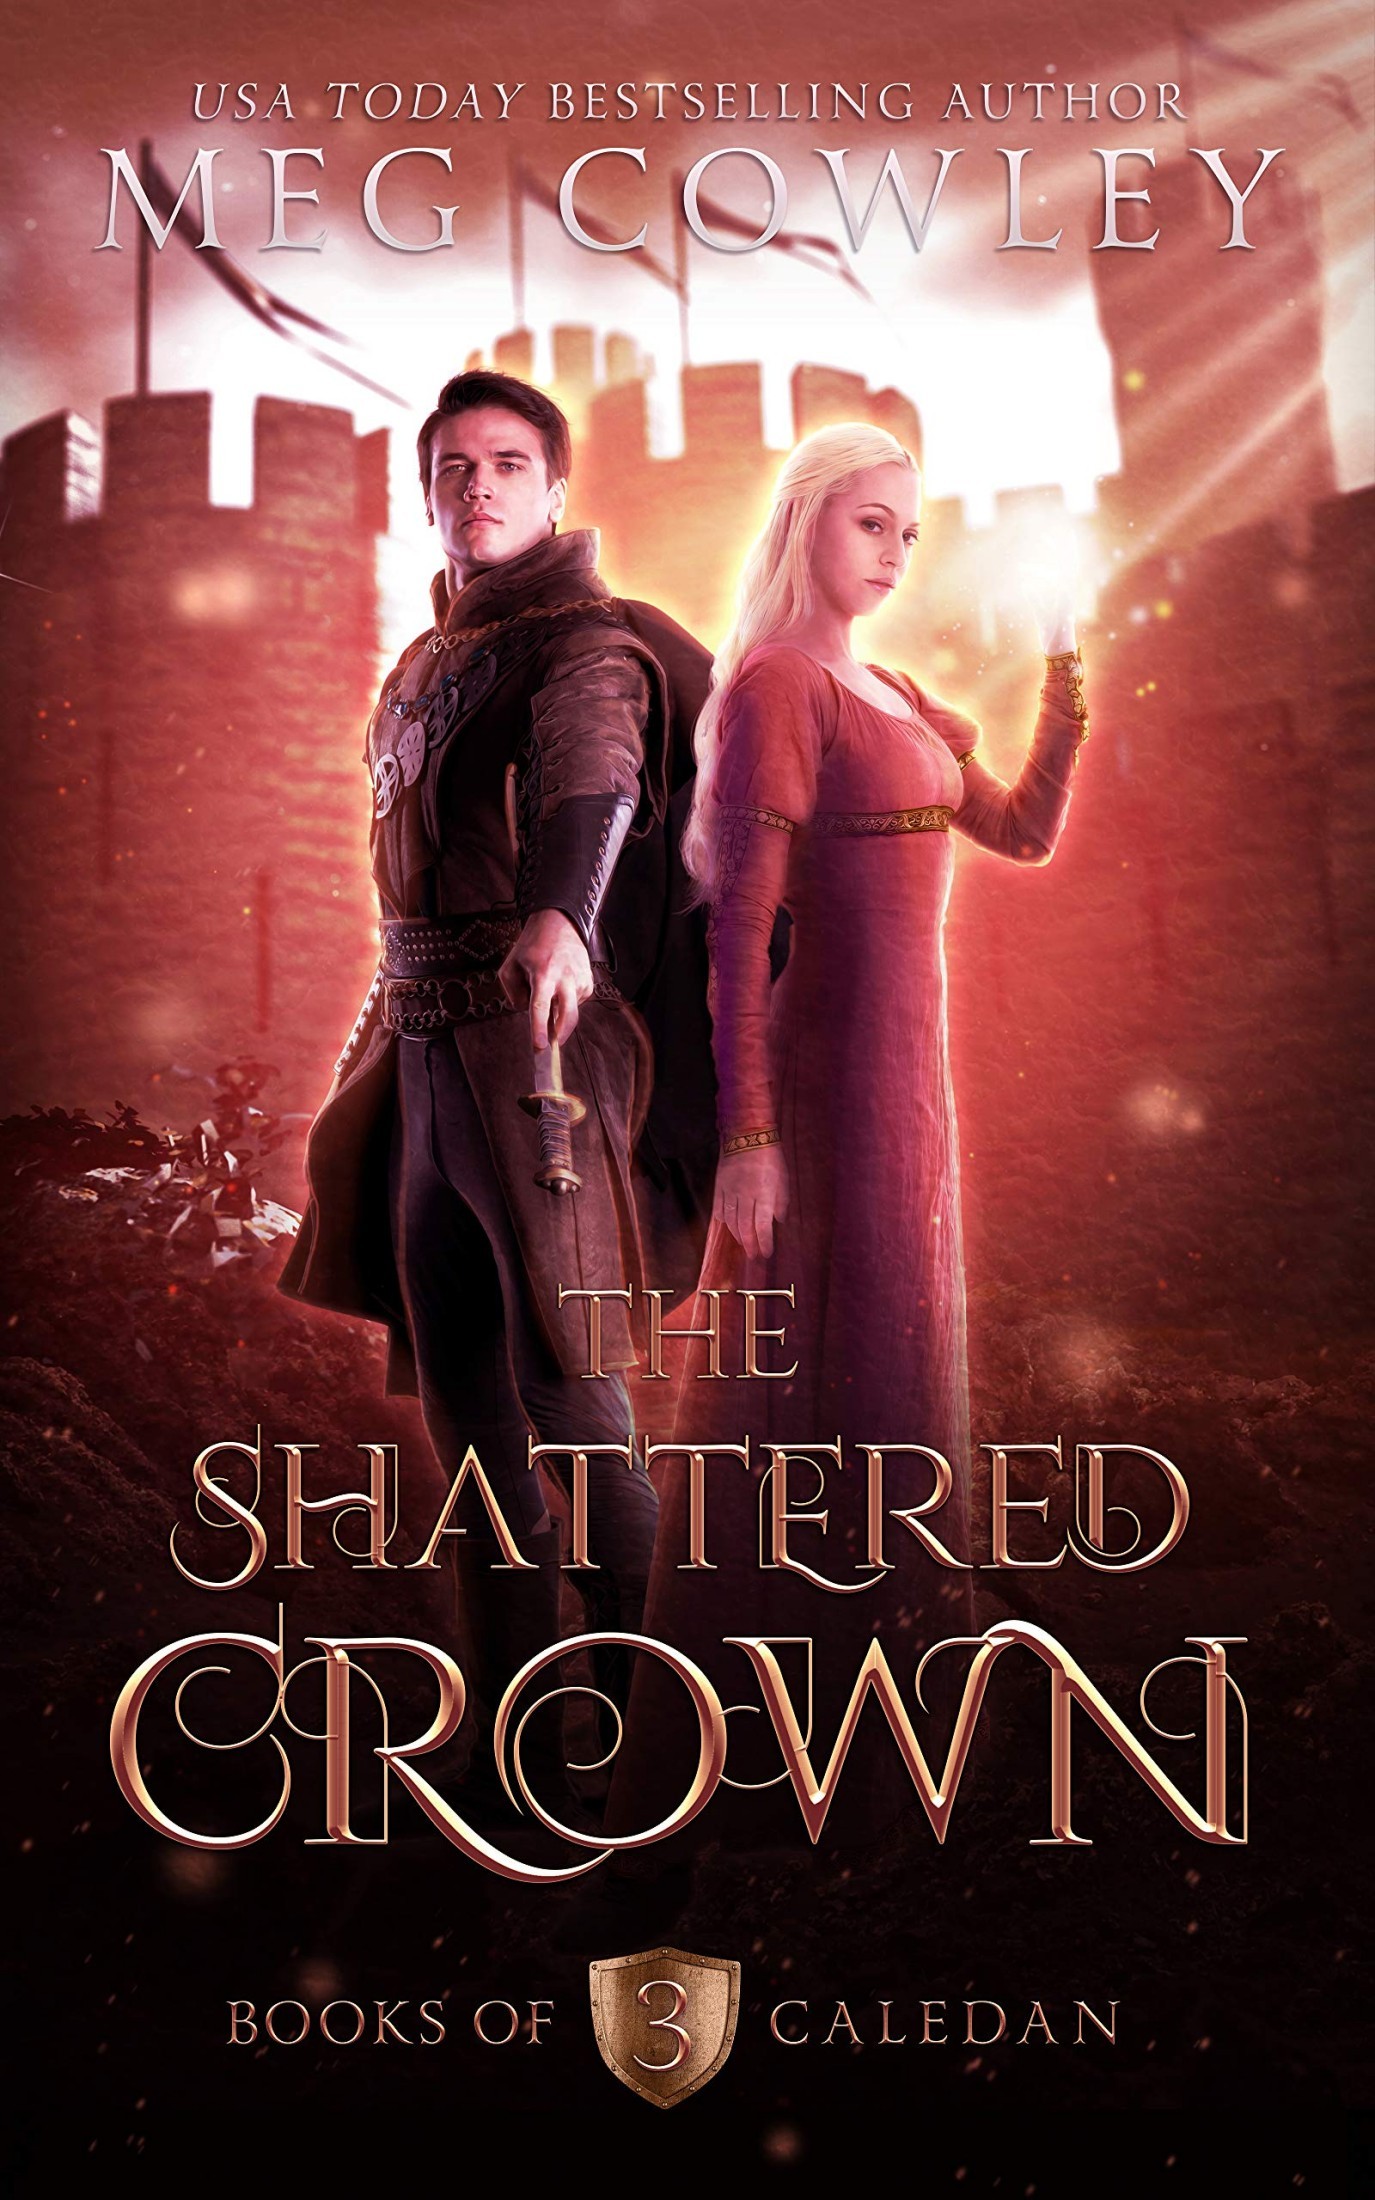 The Shattered Crown